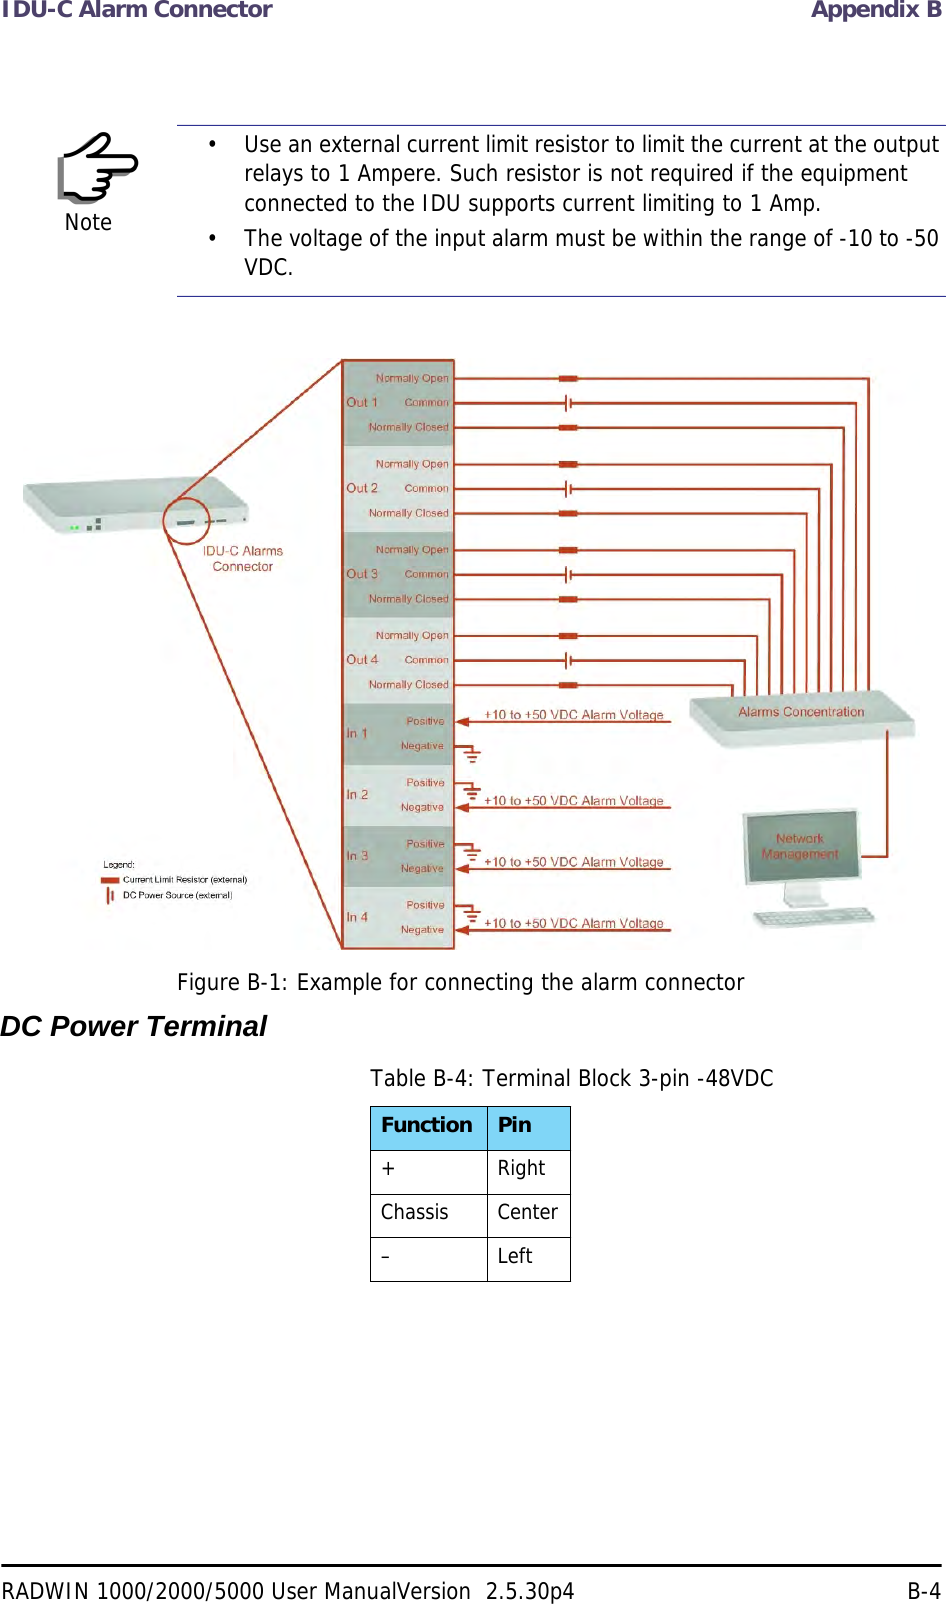 IDU-C Alarm Connector Appendix BRADWIN 1000/2000/5000 User ManualVersion  2.5.30p4 B-4Figure B-1: Example for connecting the alarm connectorDC Power TerminalNote• Use an external current limit resistor to limit the current at the output relays to 1 Ampere. Such resistor is not required if the equipment connected to the IDU supports current limiting to 1 Amp.• The voltage of the input alarm must be within the range of -10 to -50 VDC.Table B-4: Terminal Block 3-pin -48VDCFunction Pin+ RightChassis Center– Left